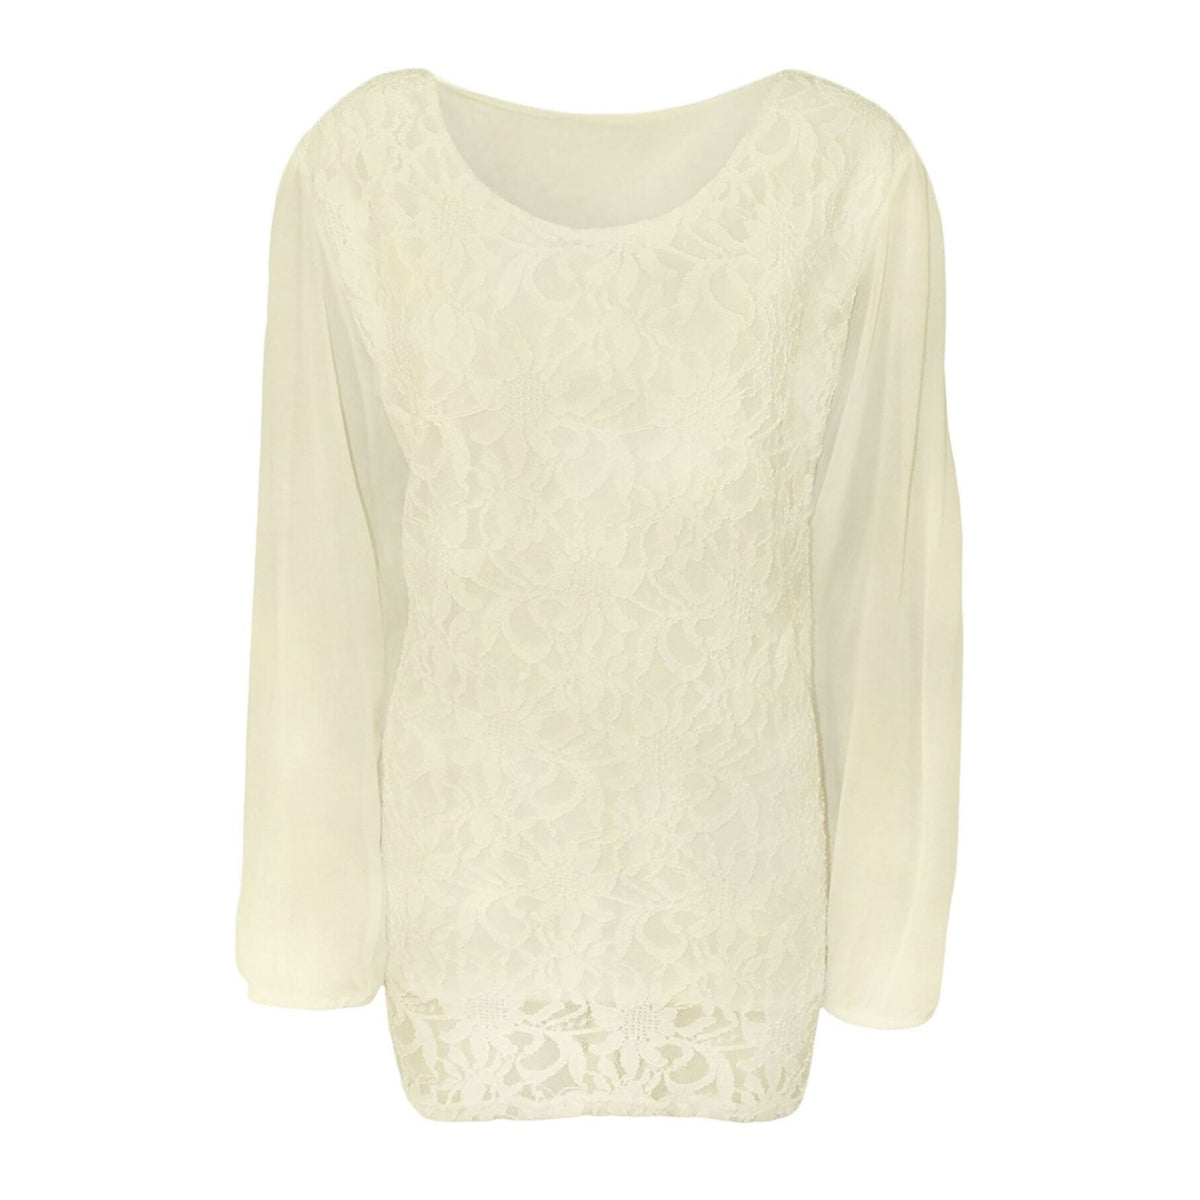 Lace blouse with long chiffon sleeves - Plus sizes too